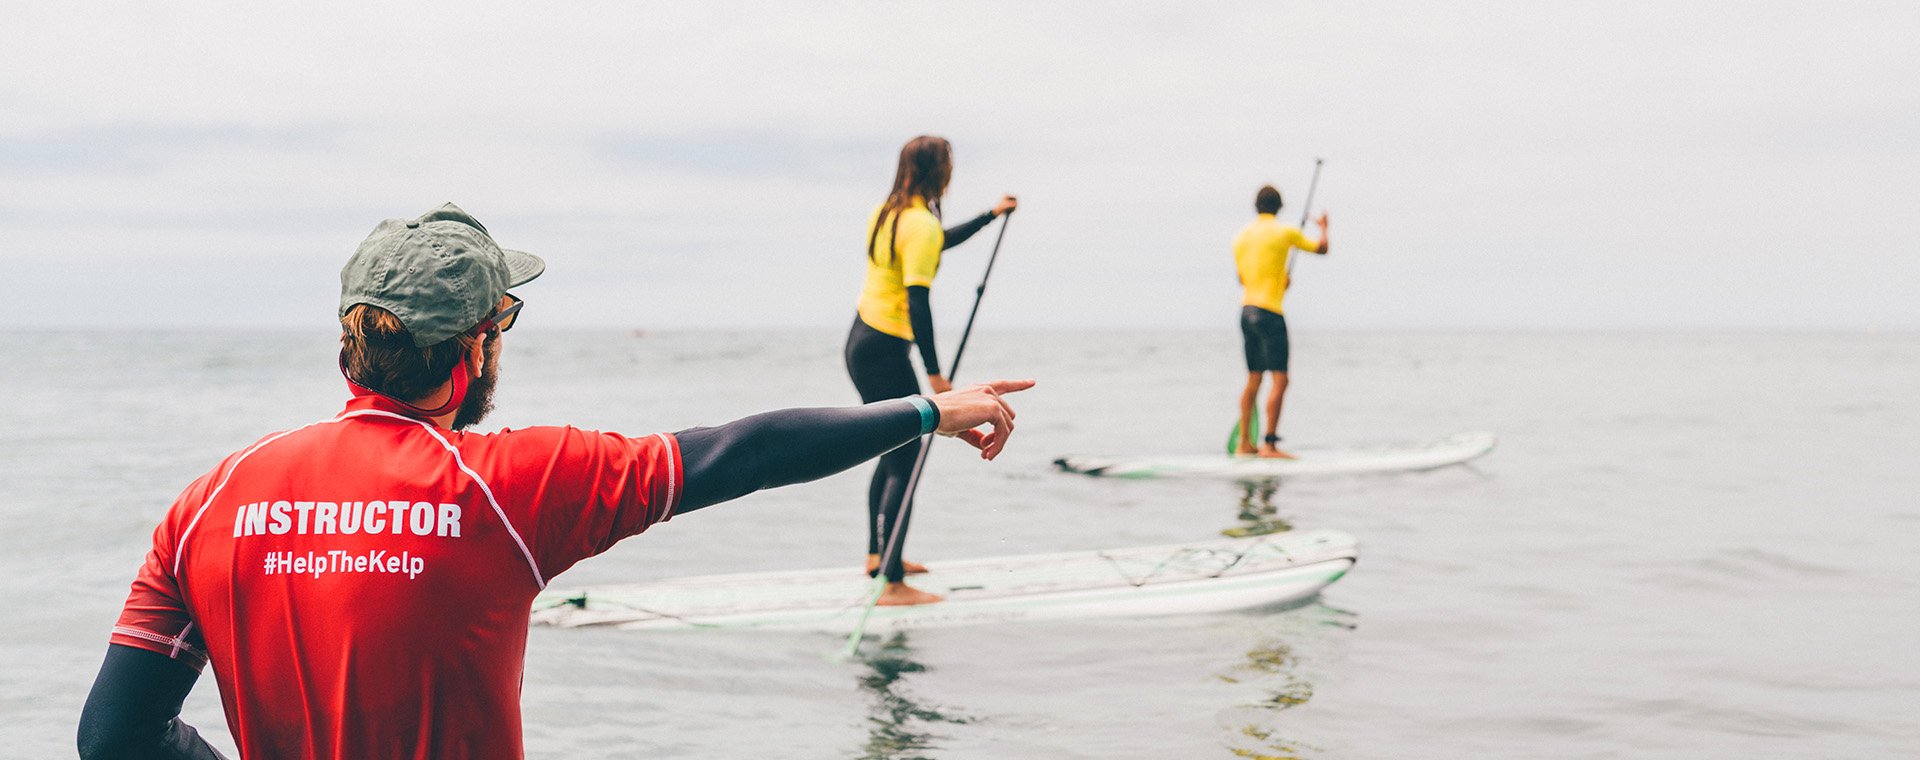 Lessons - SUP Lessons with Everyday California in La Jolla, California.